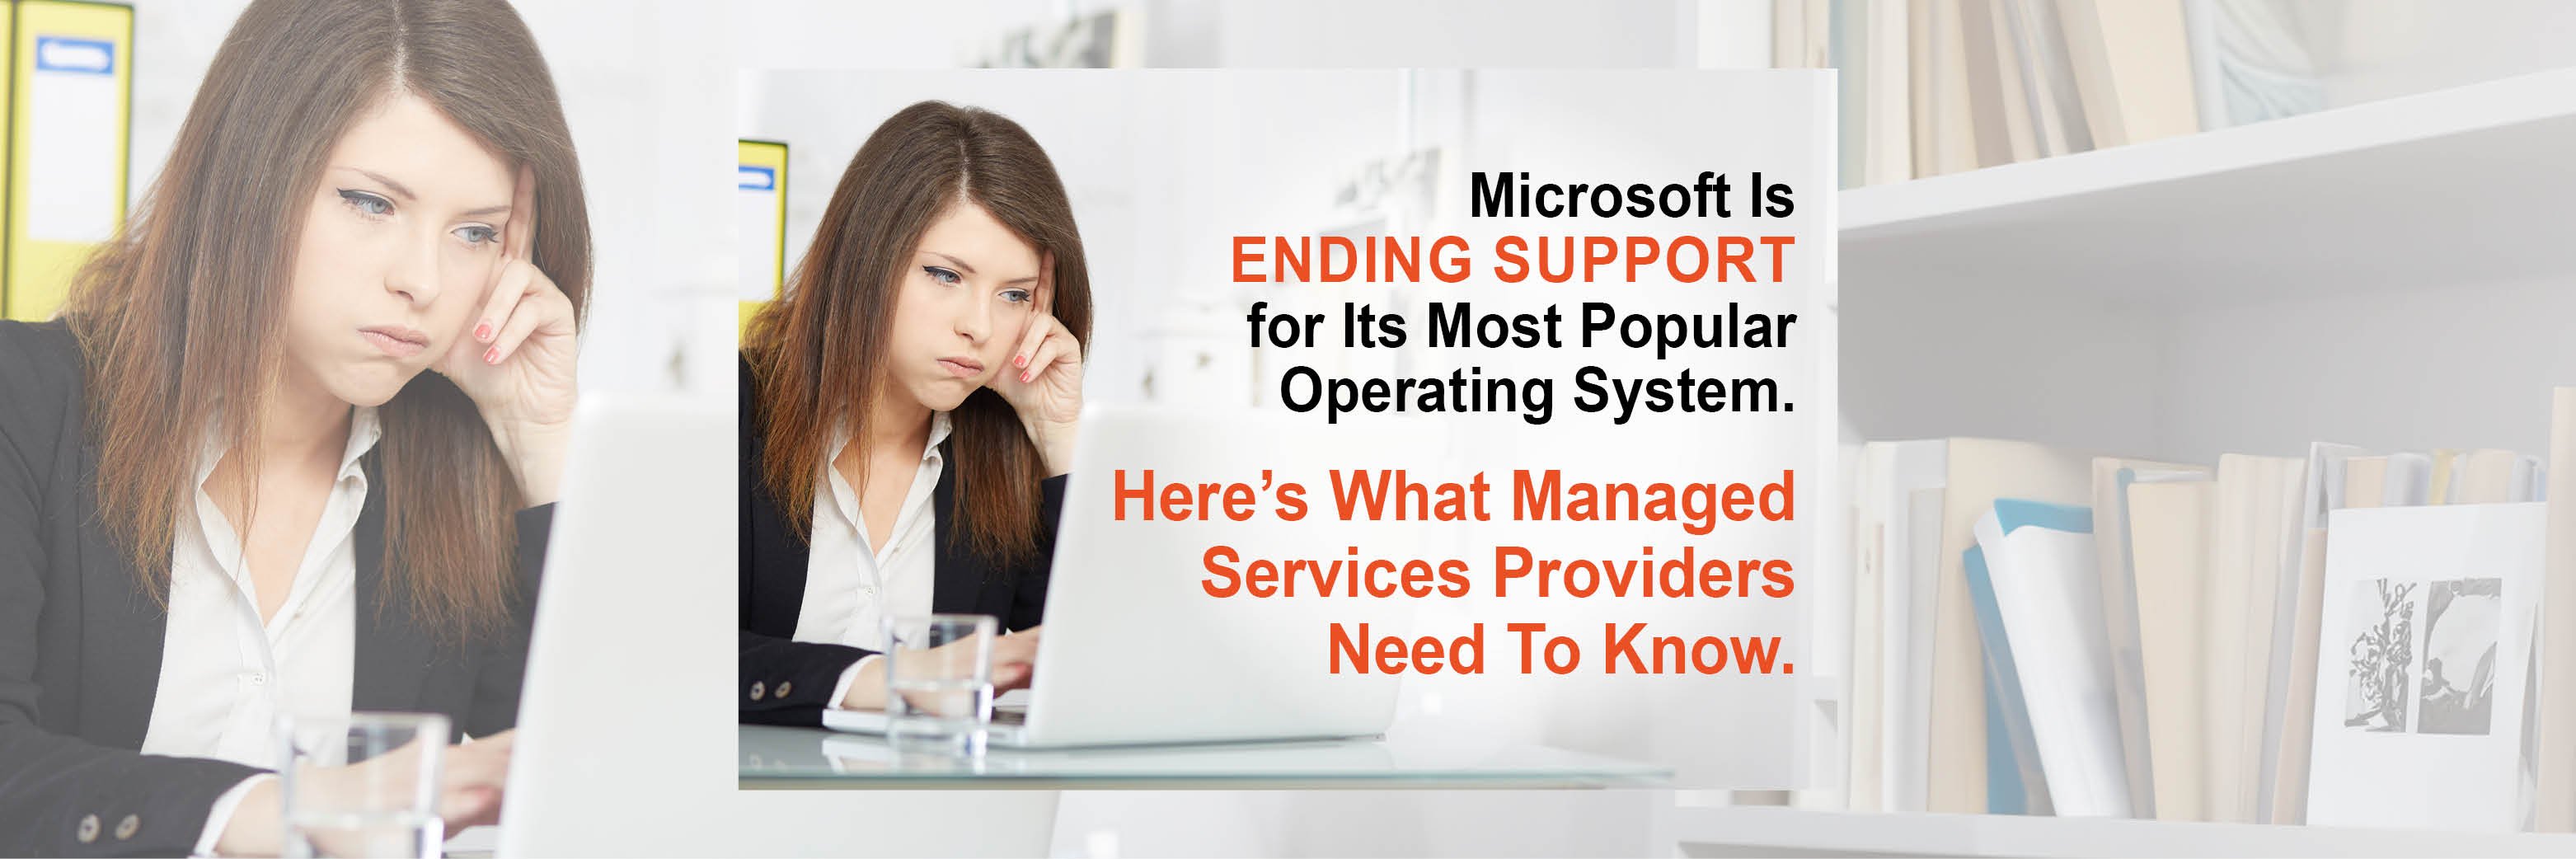 Microsoft Is Ending Support for Its Most Popular Operating System. Here’s What Managed Services Providers Need To Know.